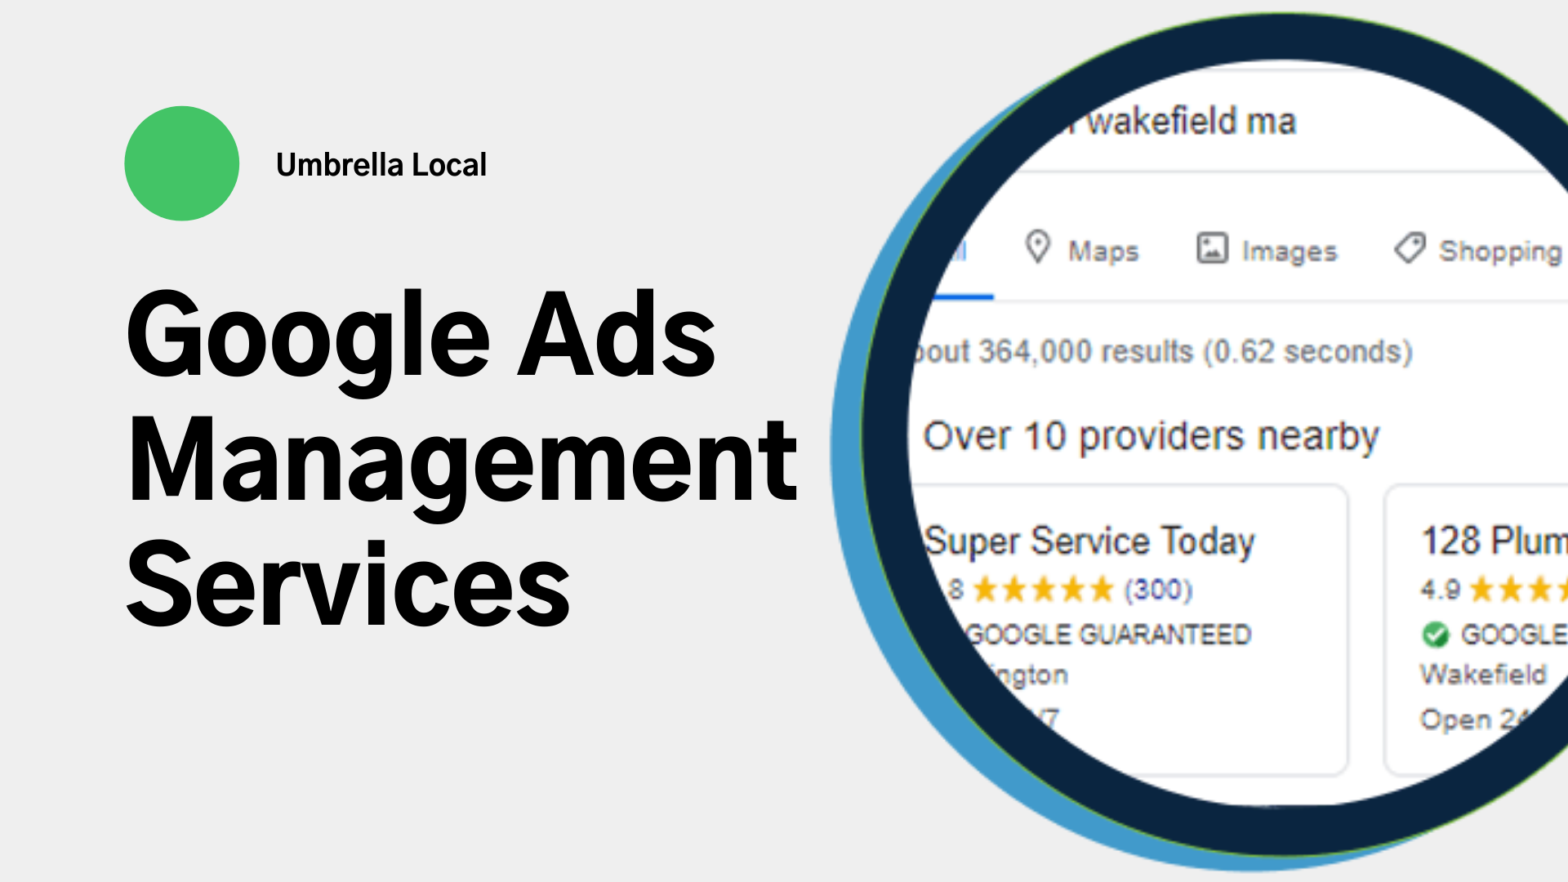  The image is a screenshot of Google search results for 'Google Ads management tools'. The results show a list of companies offering Google Ads management services.